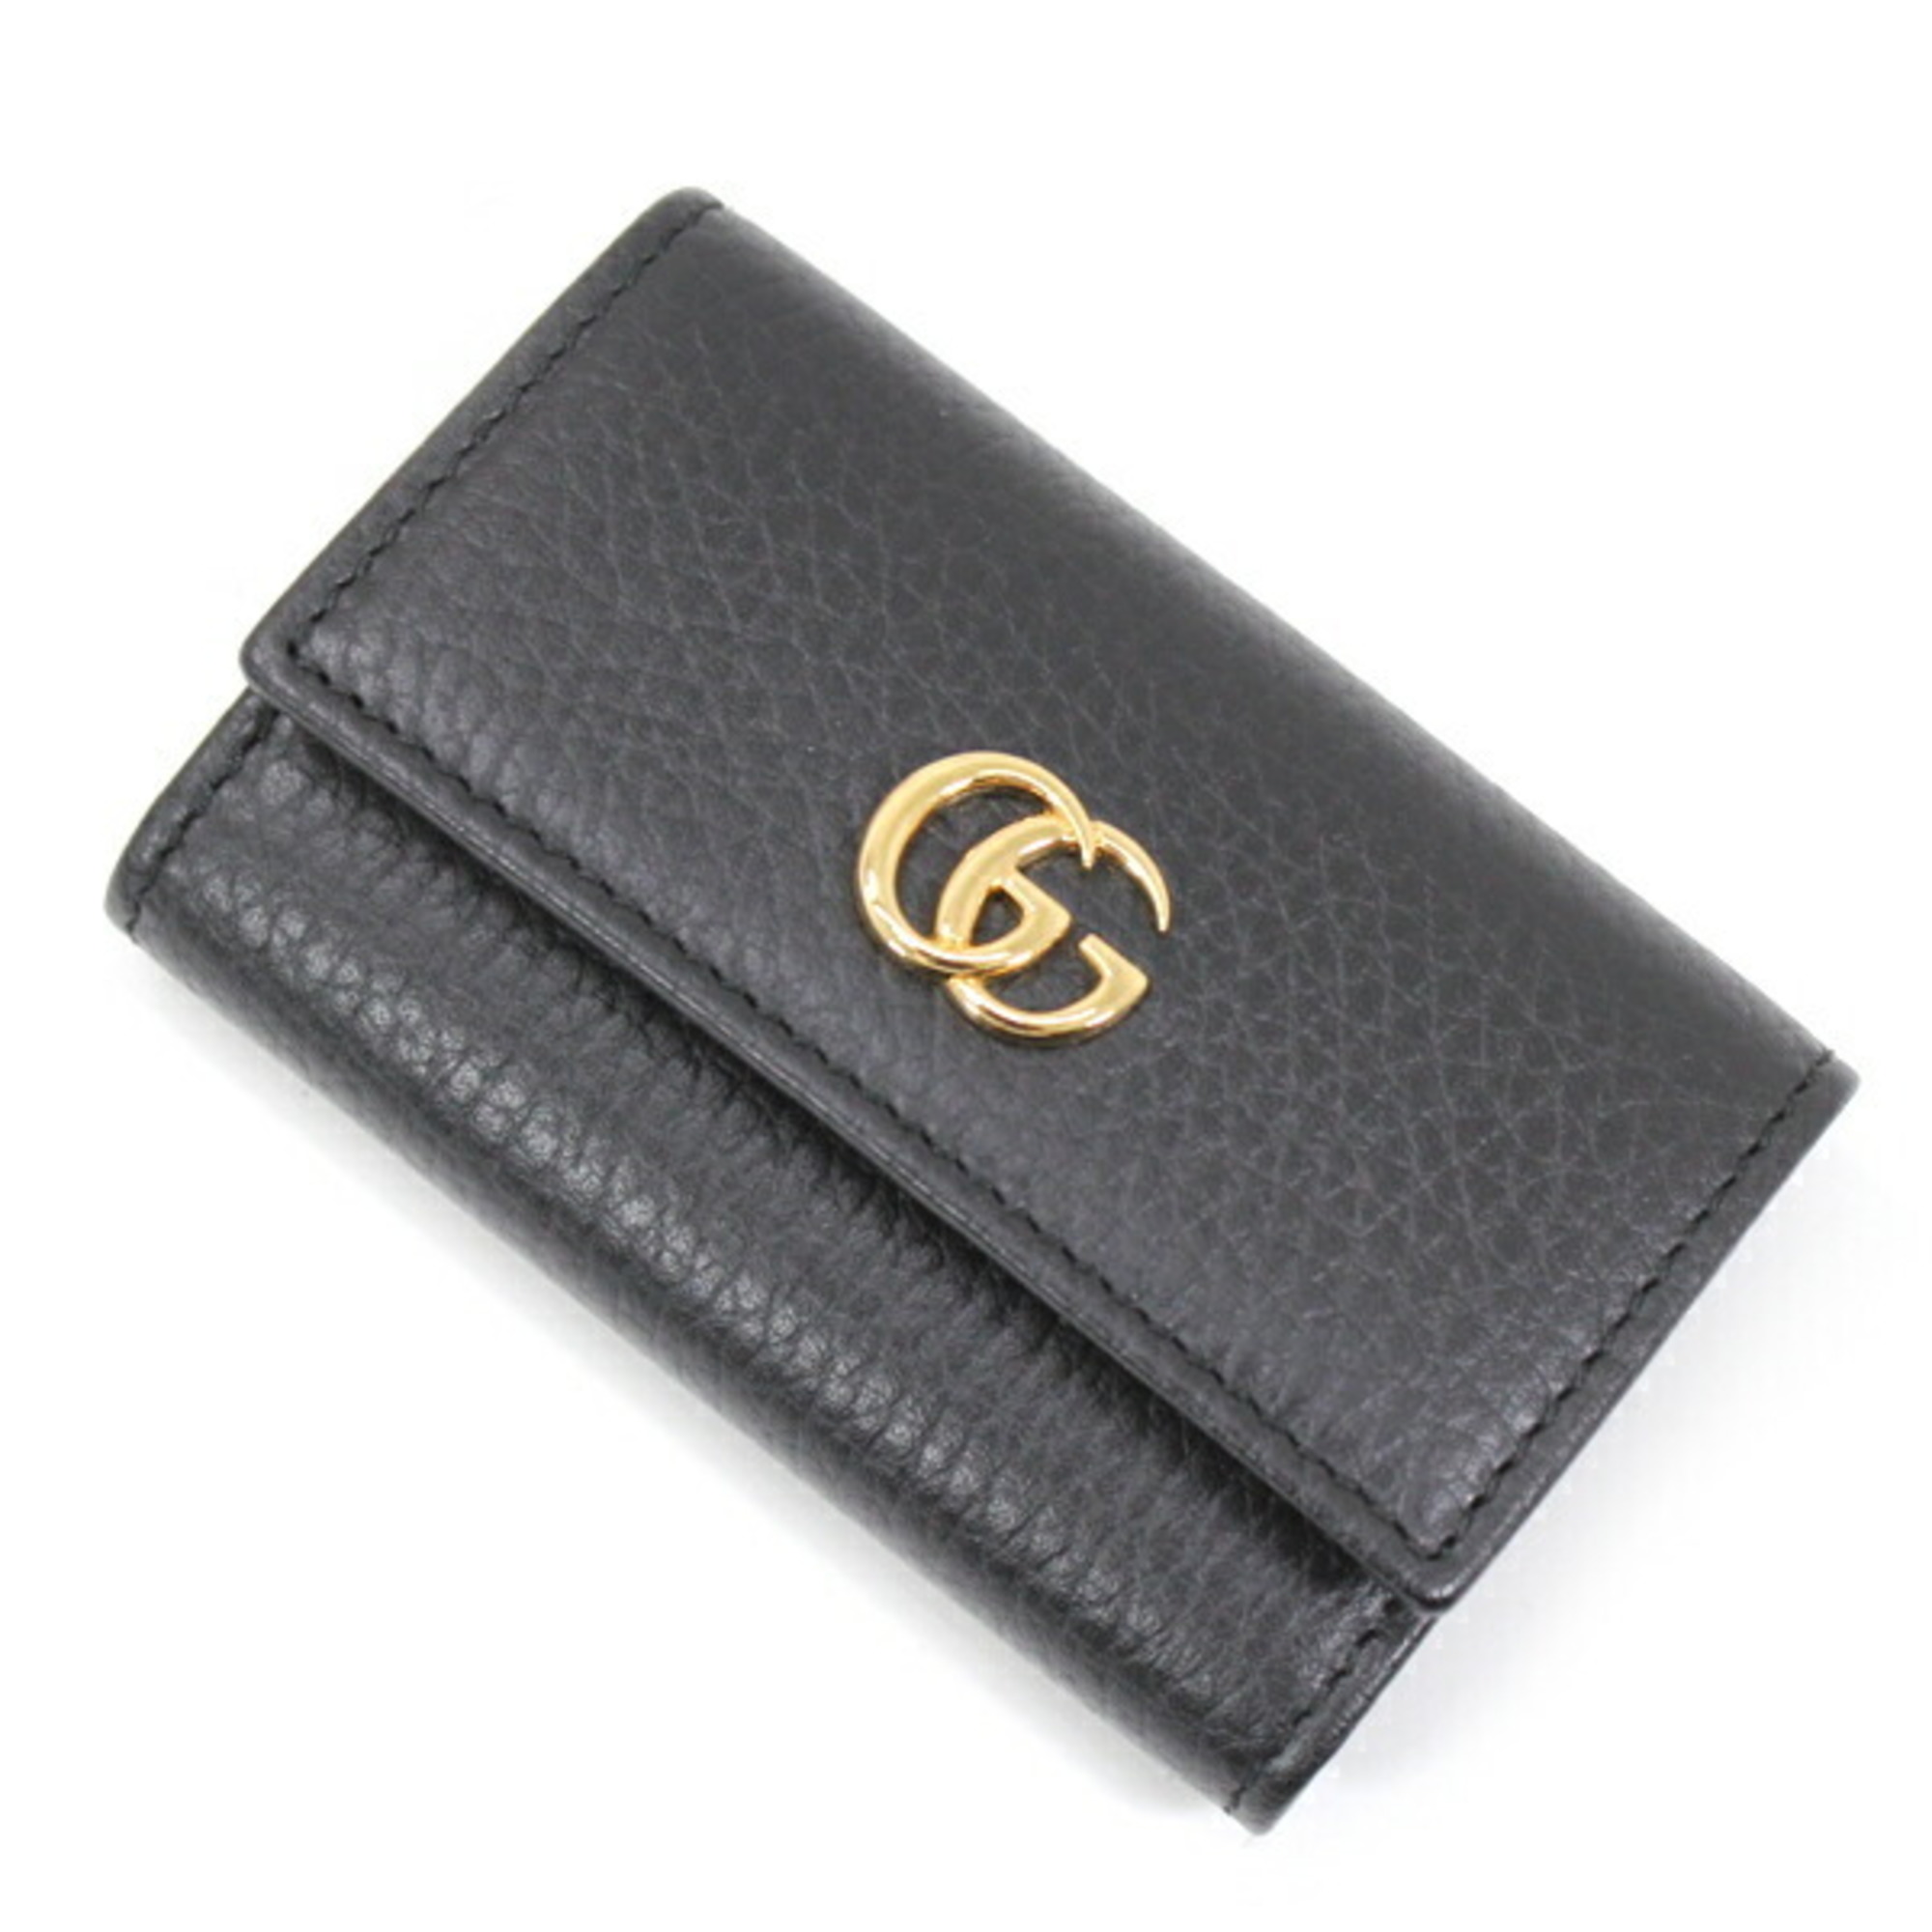 Gucci key case, 6 keys, black, GG Marmont leather, for women and men, 456118, GUCCI T4877